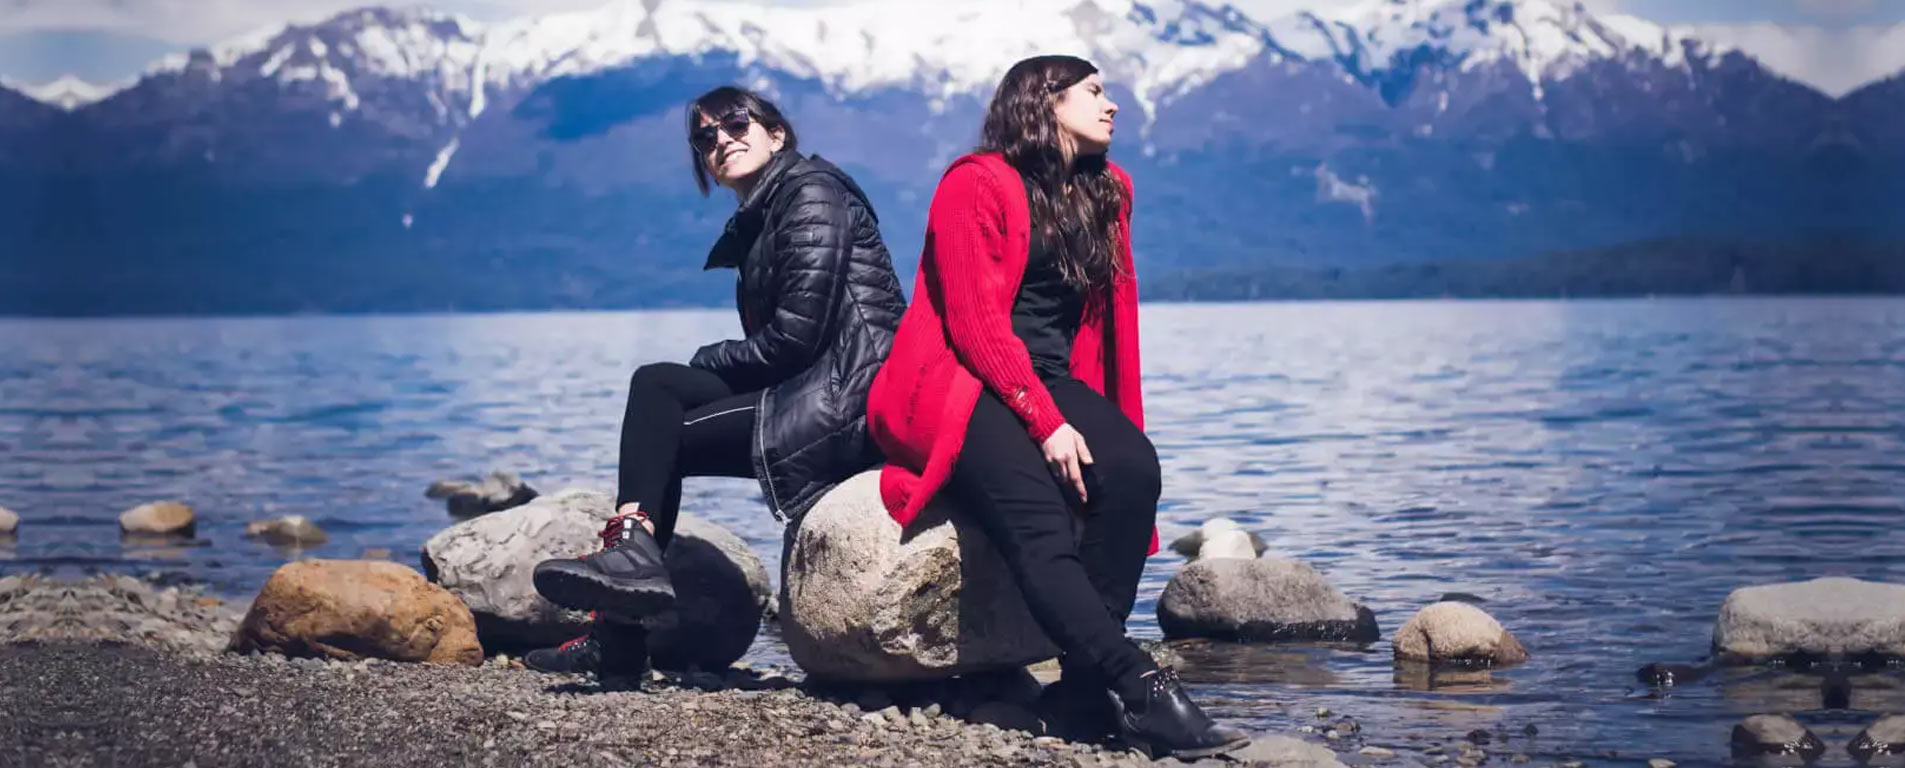 two women sitting on a rock in front of a lake